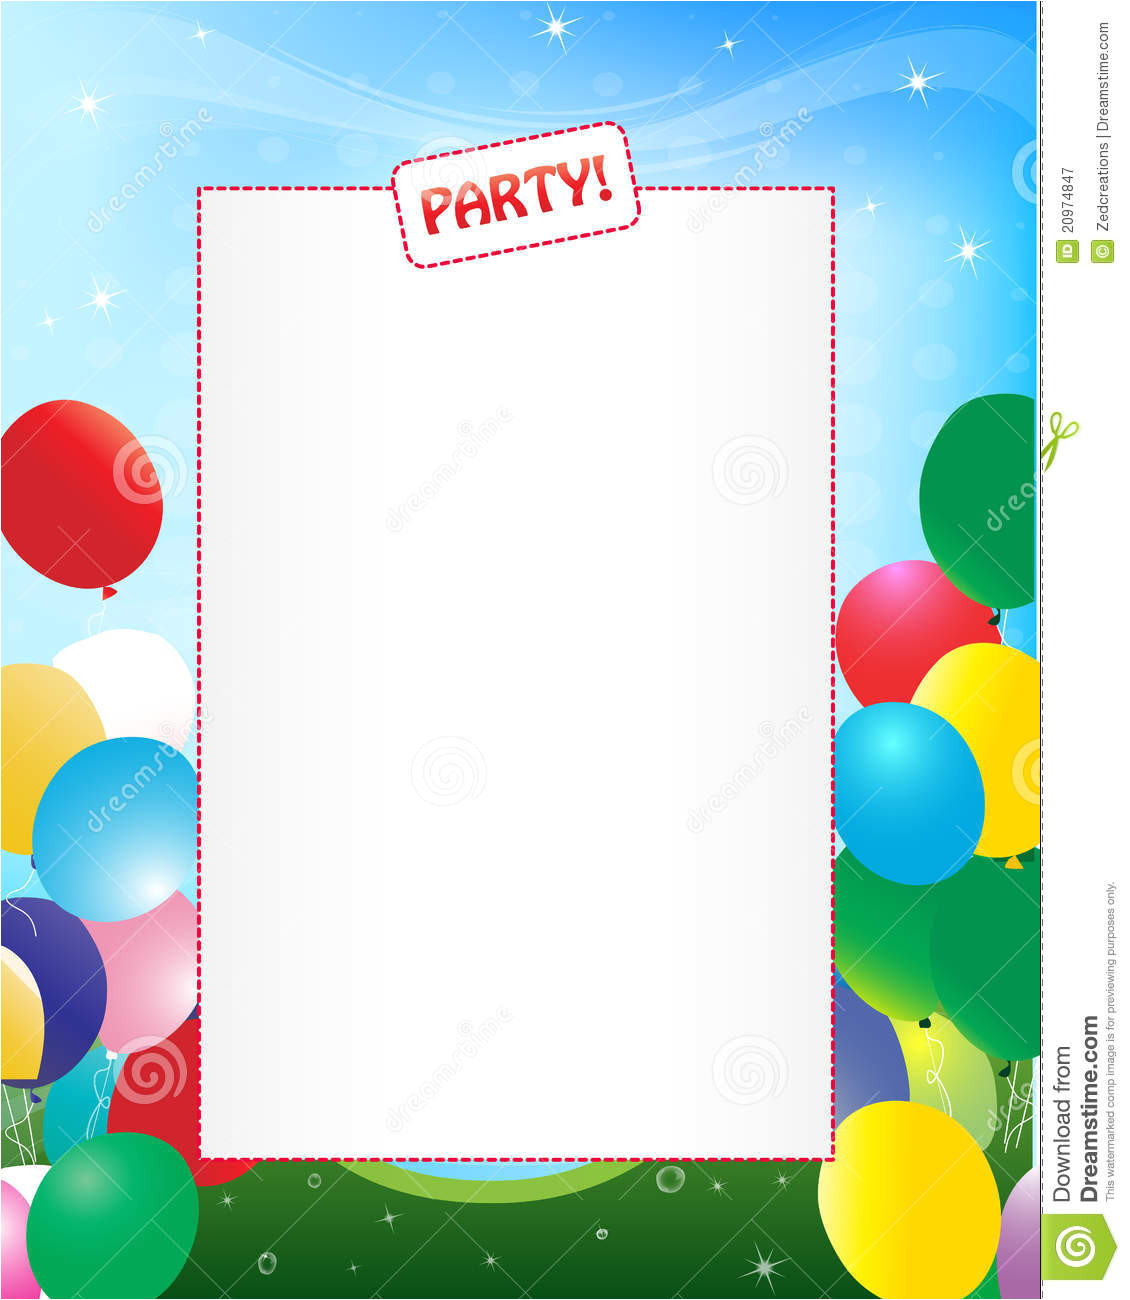 party invitation background images